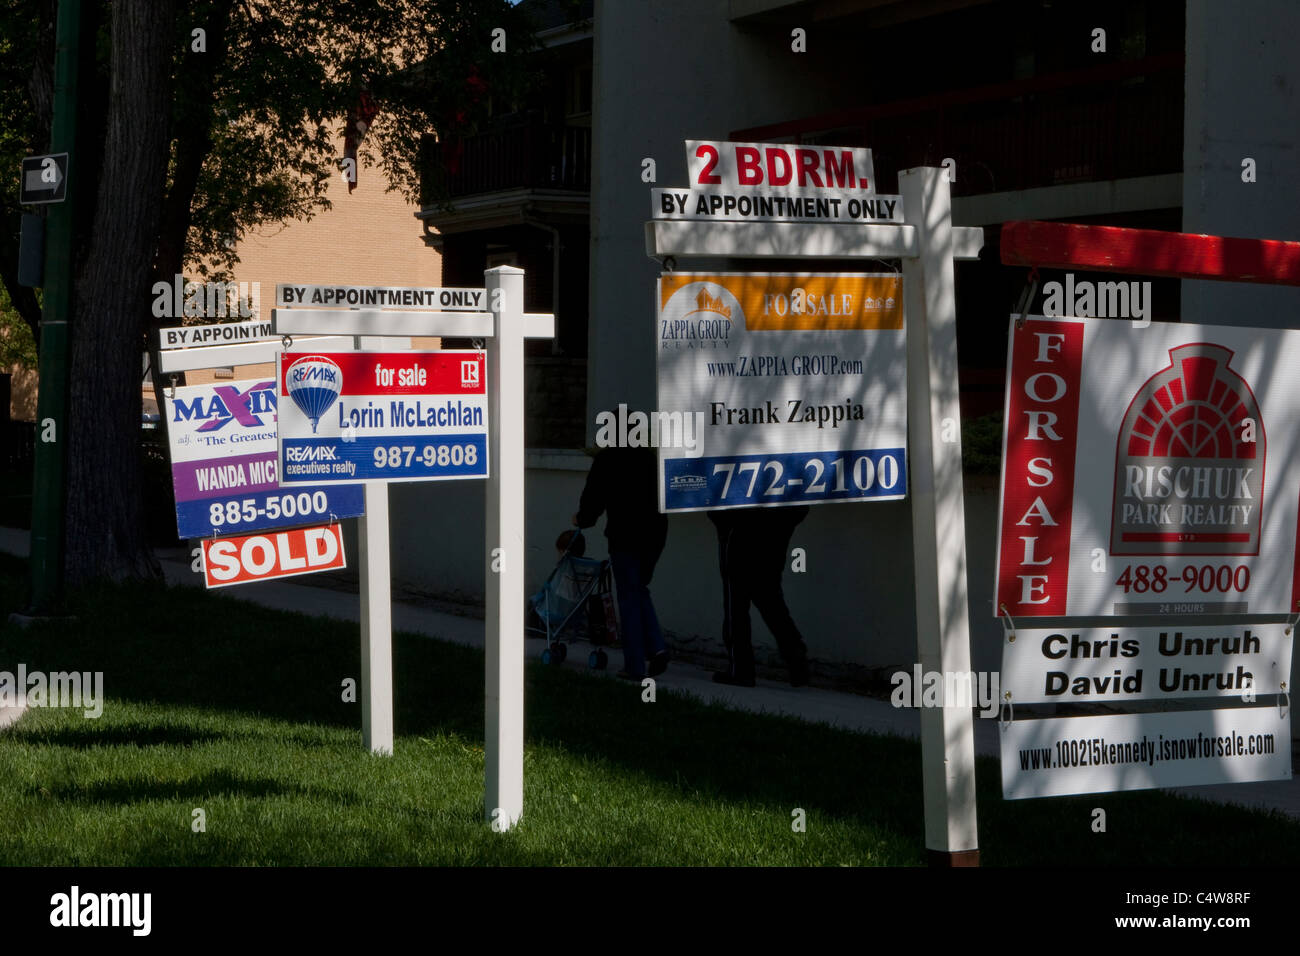 Maximum realty, Re/Max, Zappia Group realty and Rischuk Park realty 'For sale' signs are seen next to each other in Winnipeg Stock Photo